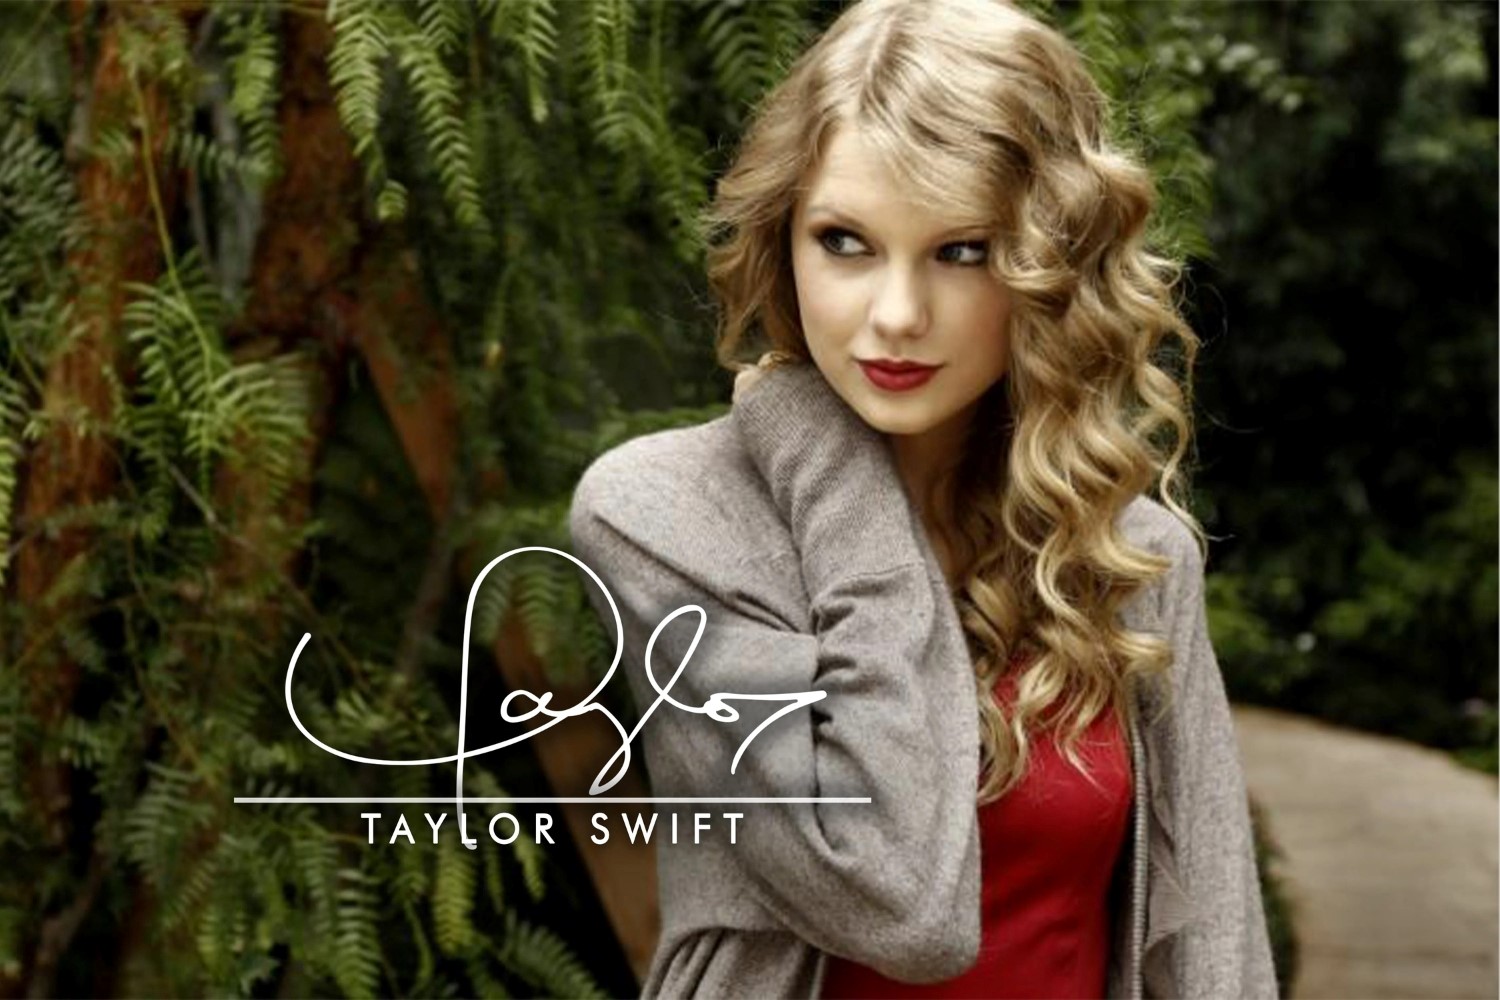 Unlock The Secret To Scoring An Exclusive Autographed Taylor Swift Poster!